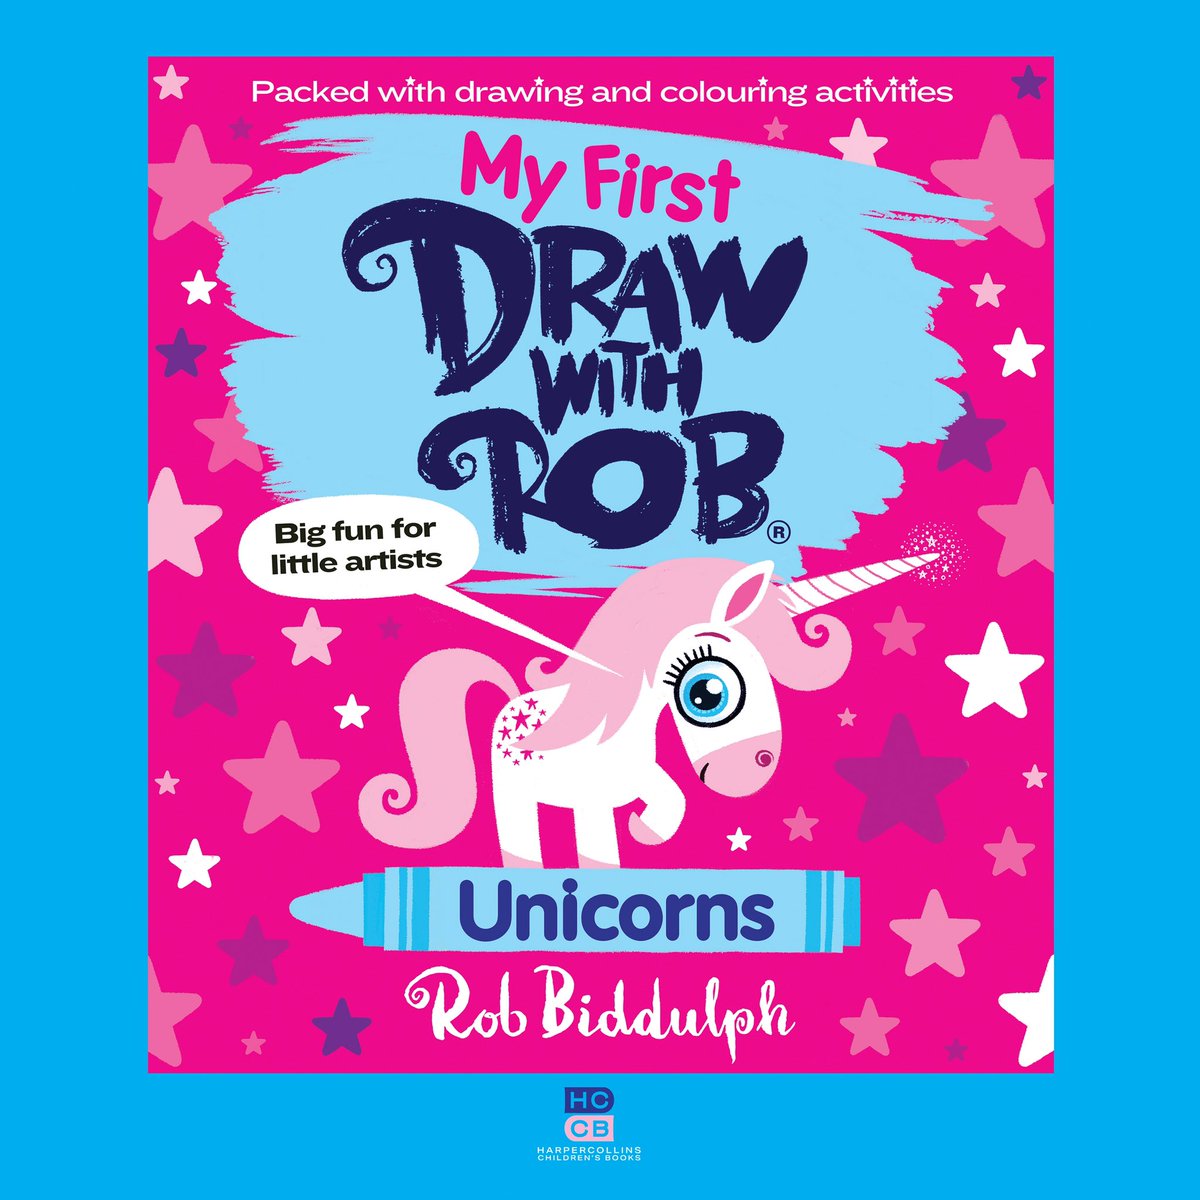 ✨NEW BOOK OUT TODAY✨ ‘My First #DrawWithRob: Unicorns’ is out now! Lots of drawing, colouring, puzzles, rainbows and sparkles for your little artists. 🦄🌈 Available from these places… 👇 tinyurl.com/4mpfcytj tinyurl.com/mry7y2kc tinyurl.com/t3kx4478